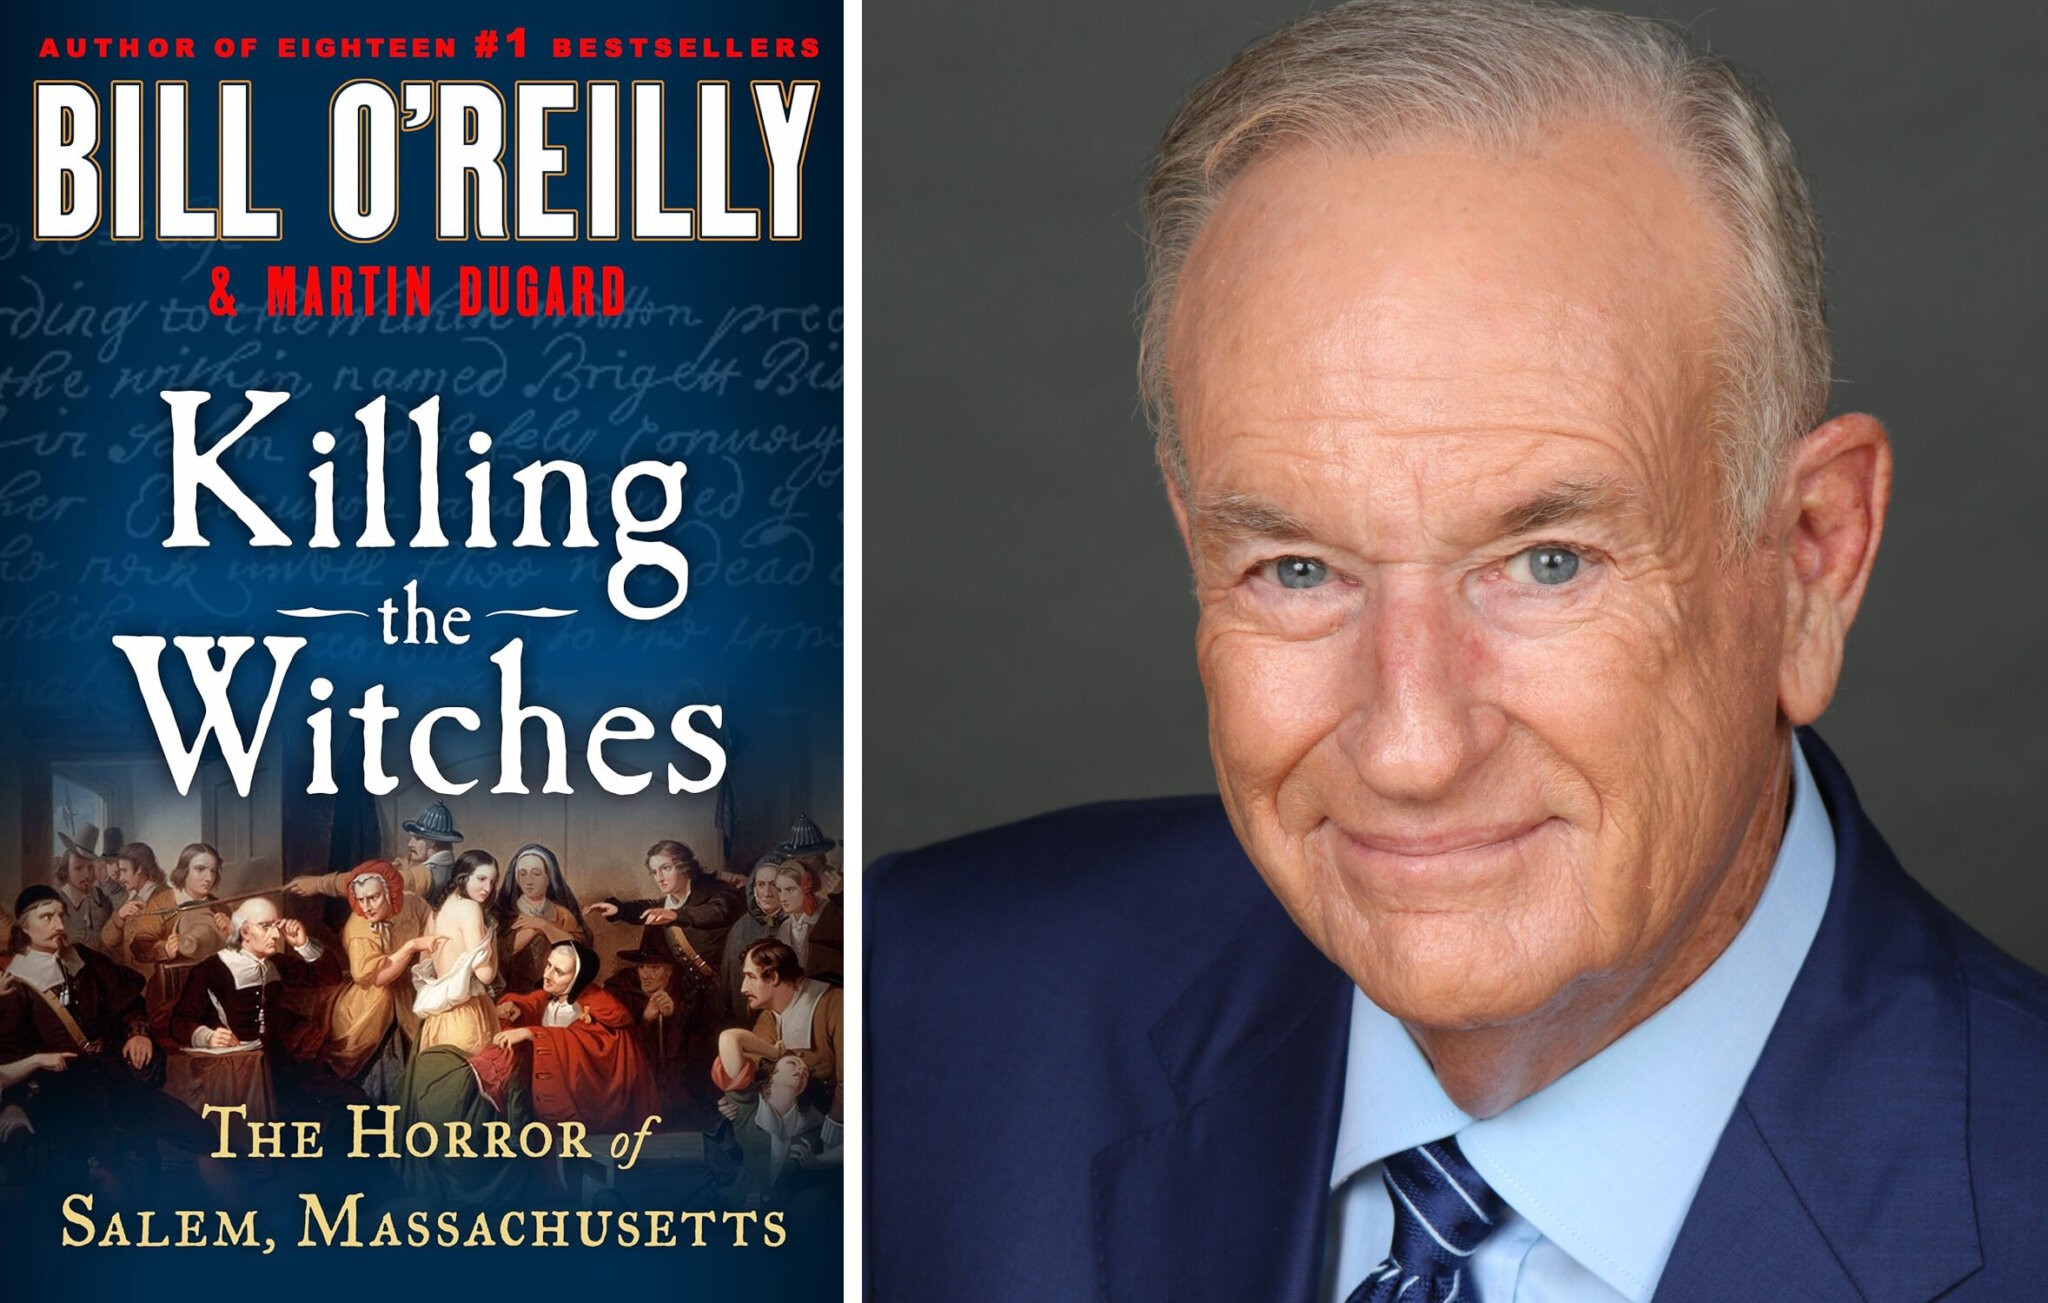 Killing The Witches by Bill O'Reilly (right) and Martin Dugard